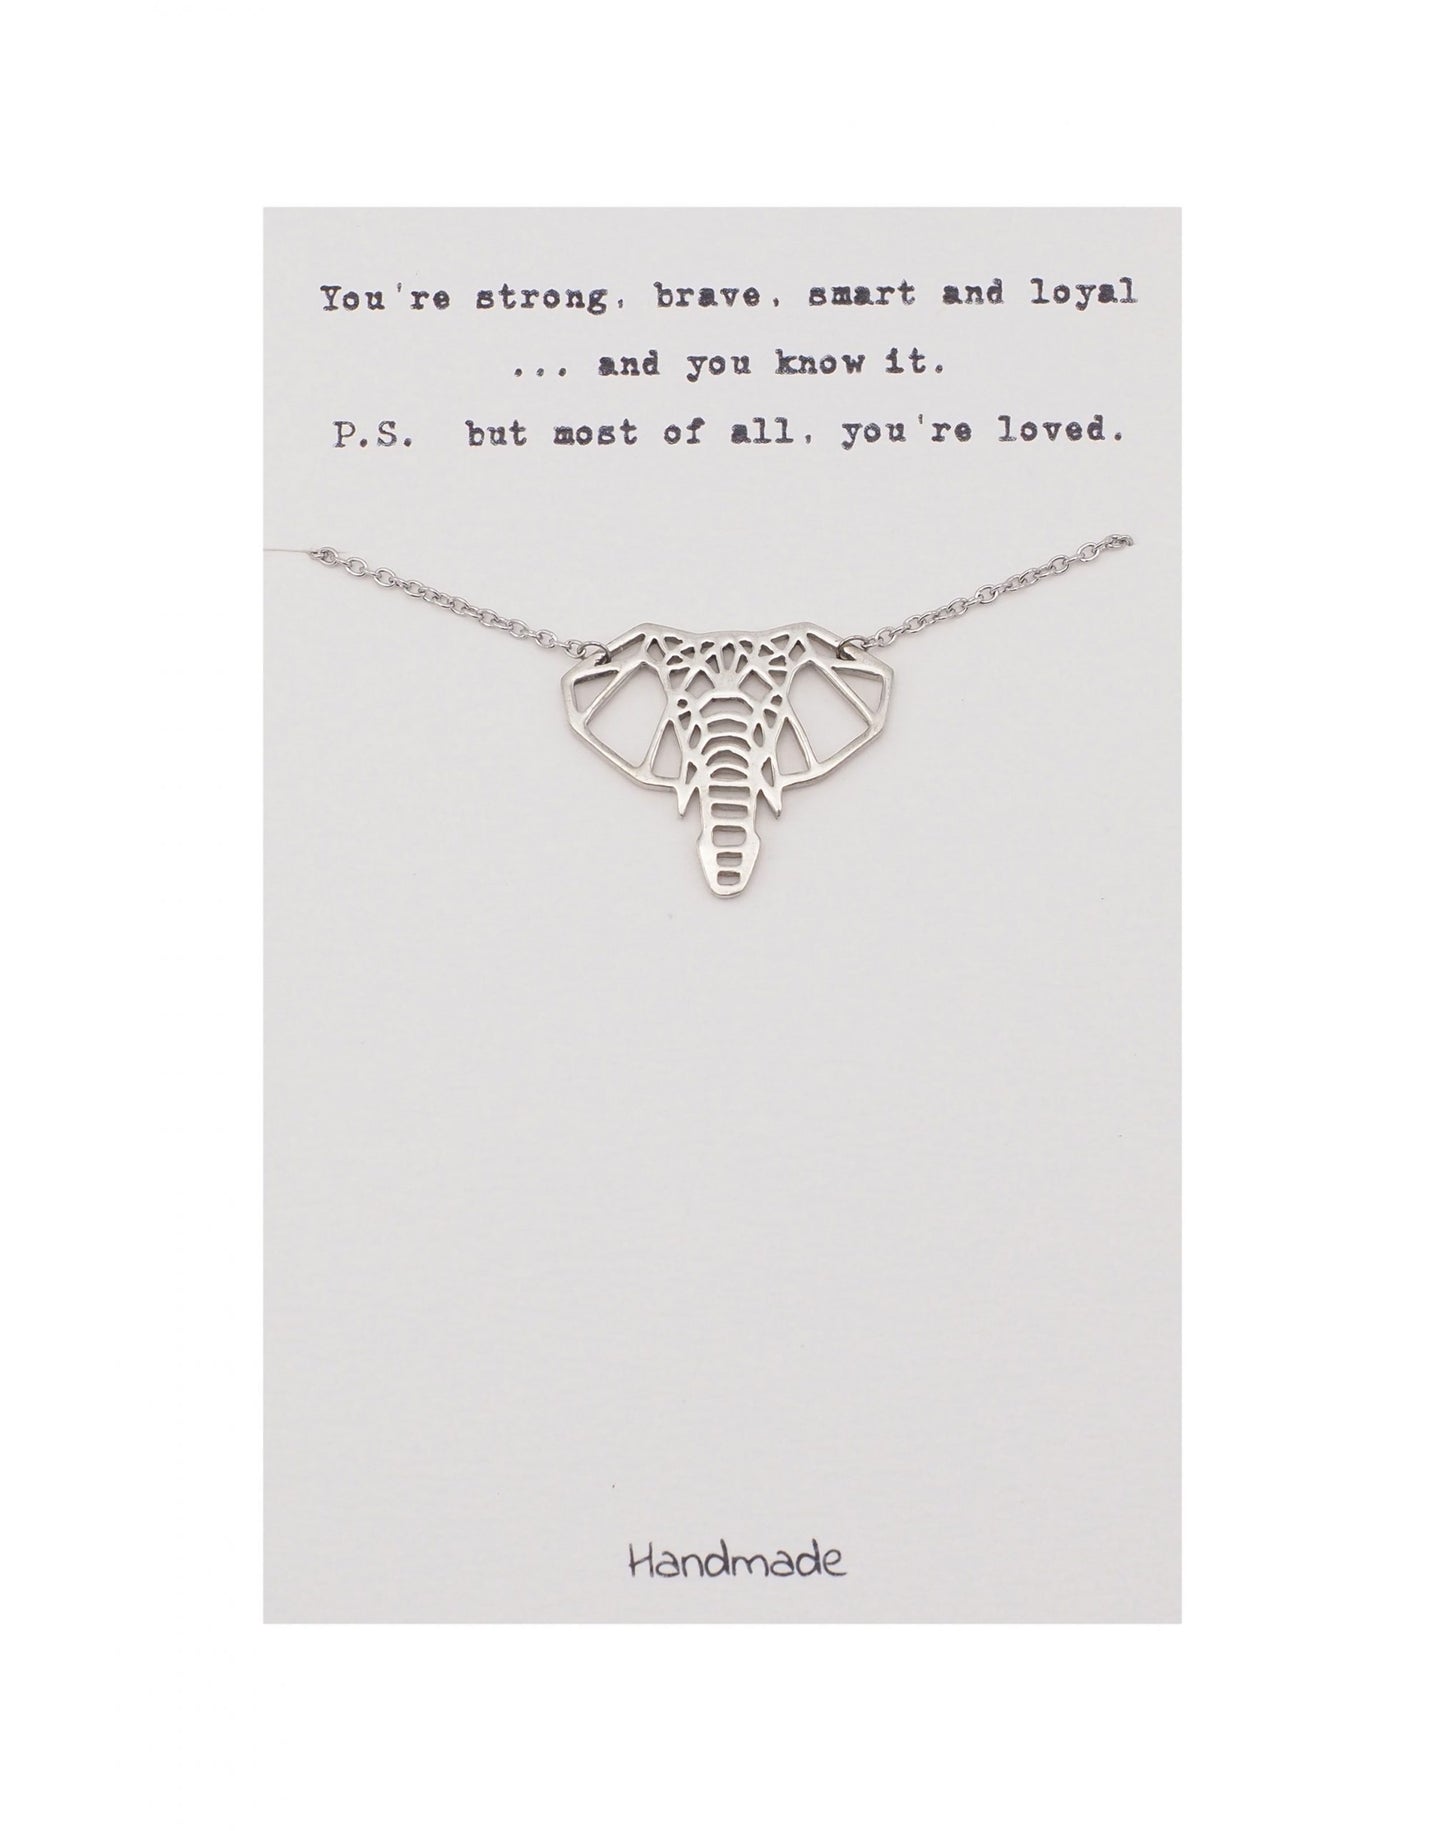 Quinnlyn & Co. Elephant Pendant Necklace, Gifts for Women with Inspirational Quote on Greeting Card